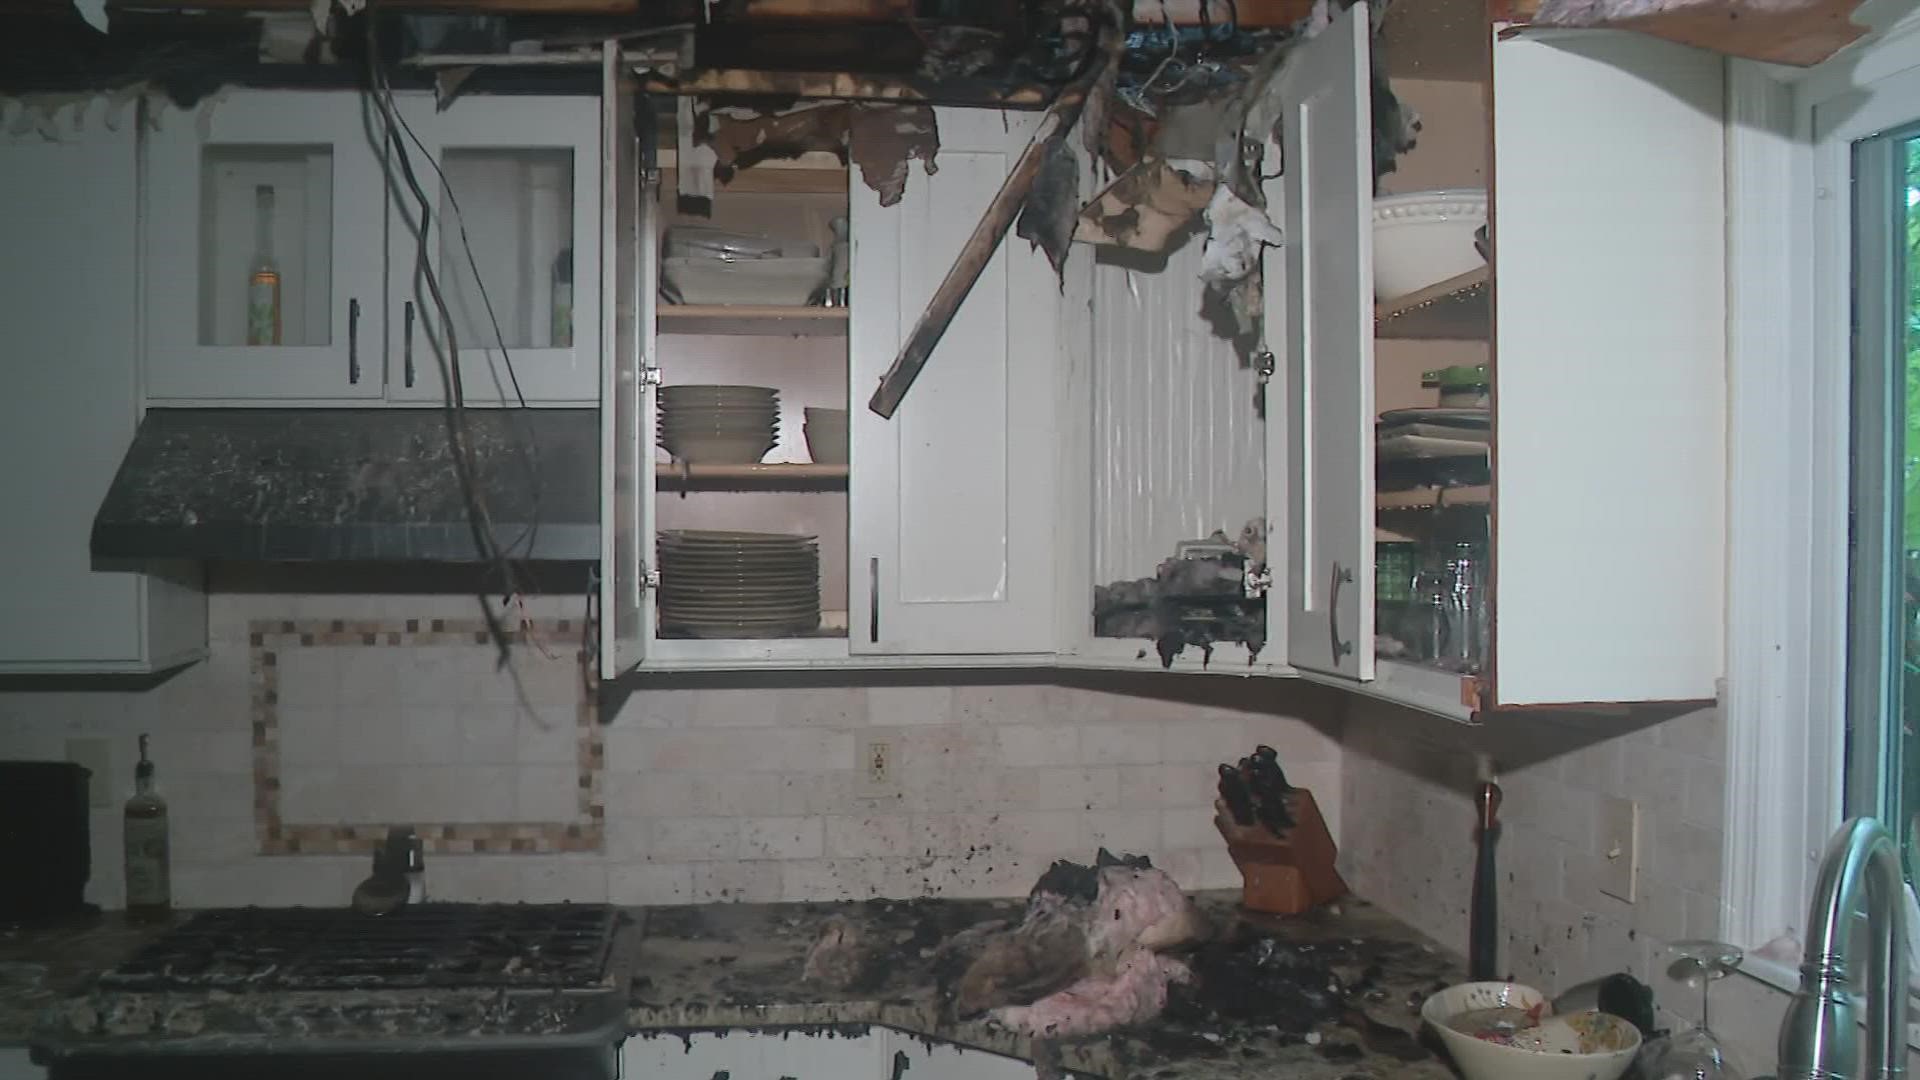 The suspected lightning struck just inches from the bedroom where his grandchild was sleeping.